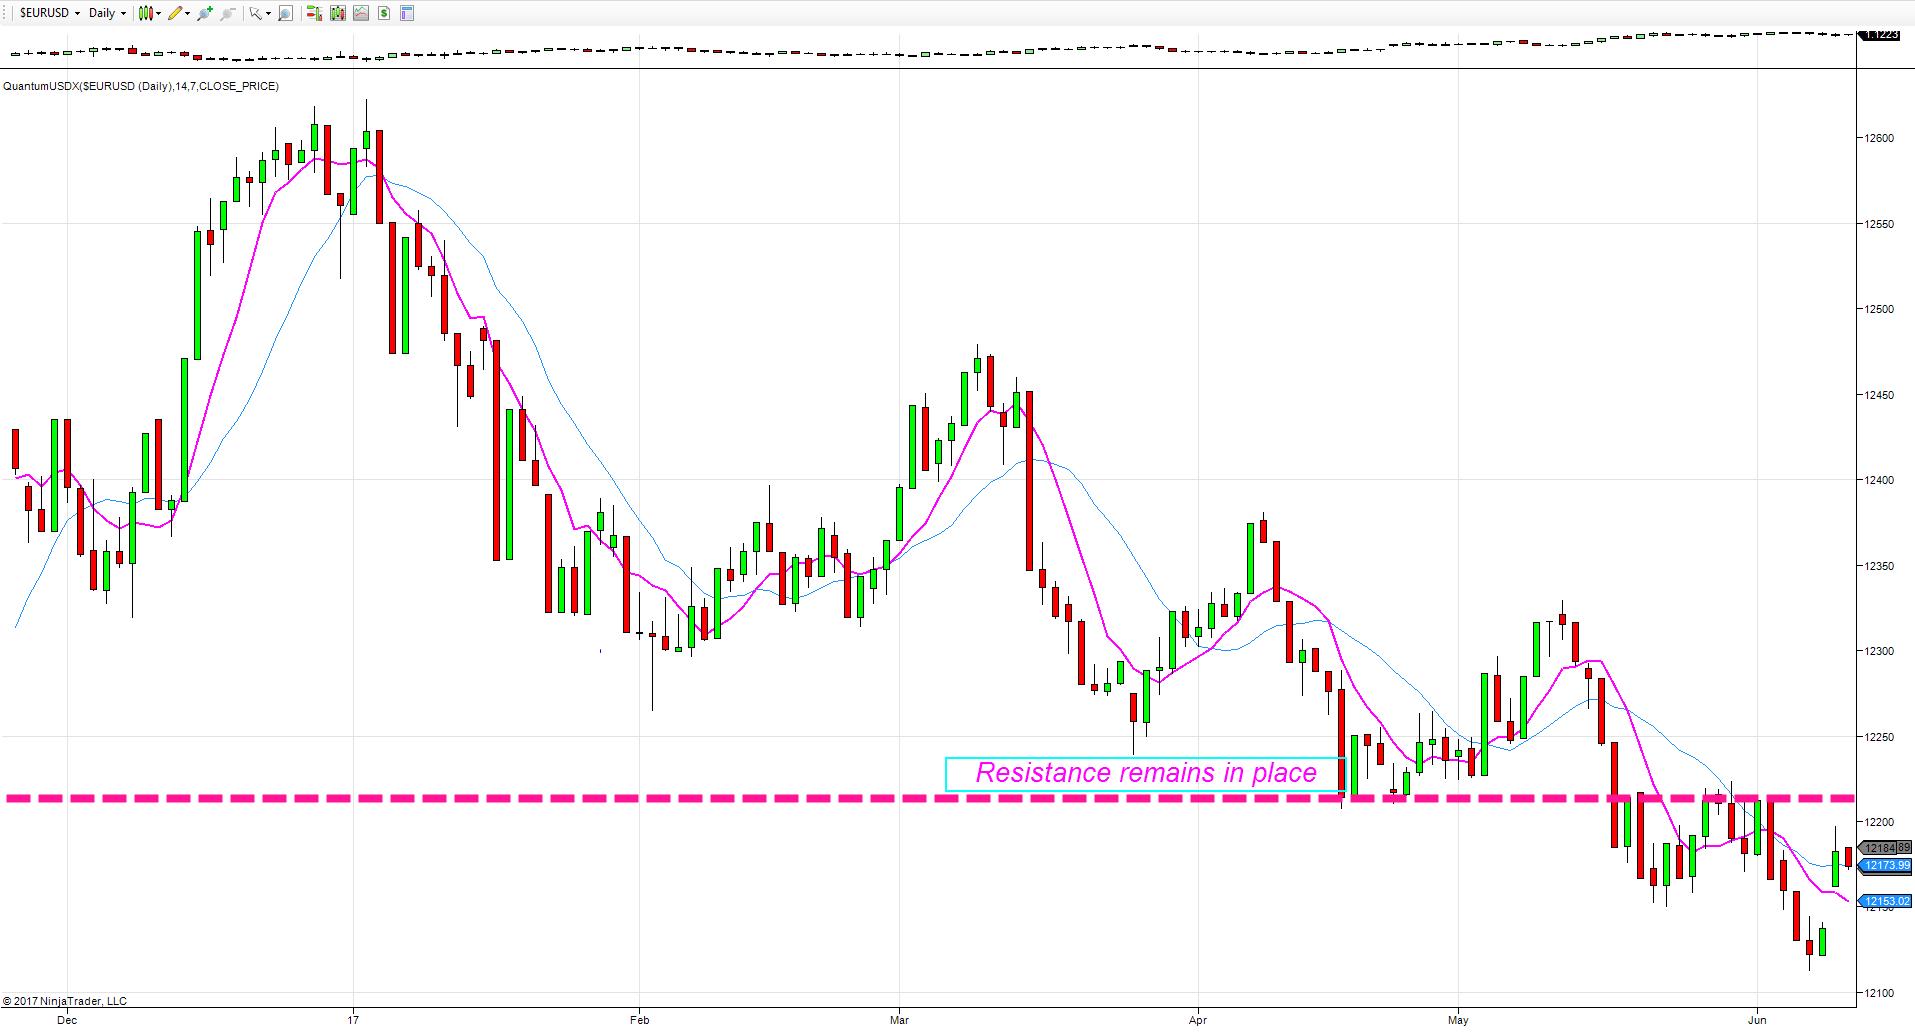 USD index daily chart